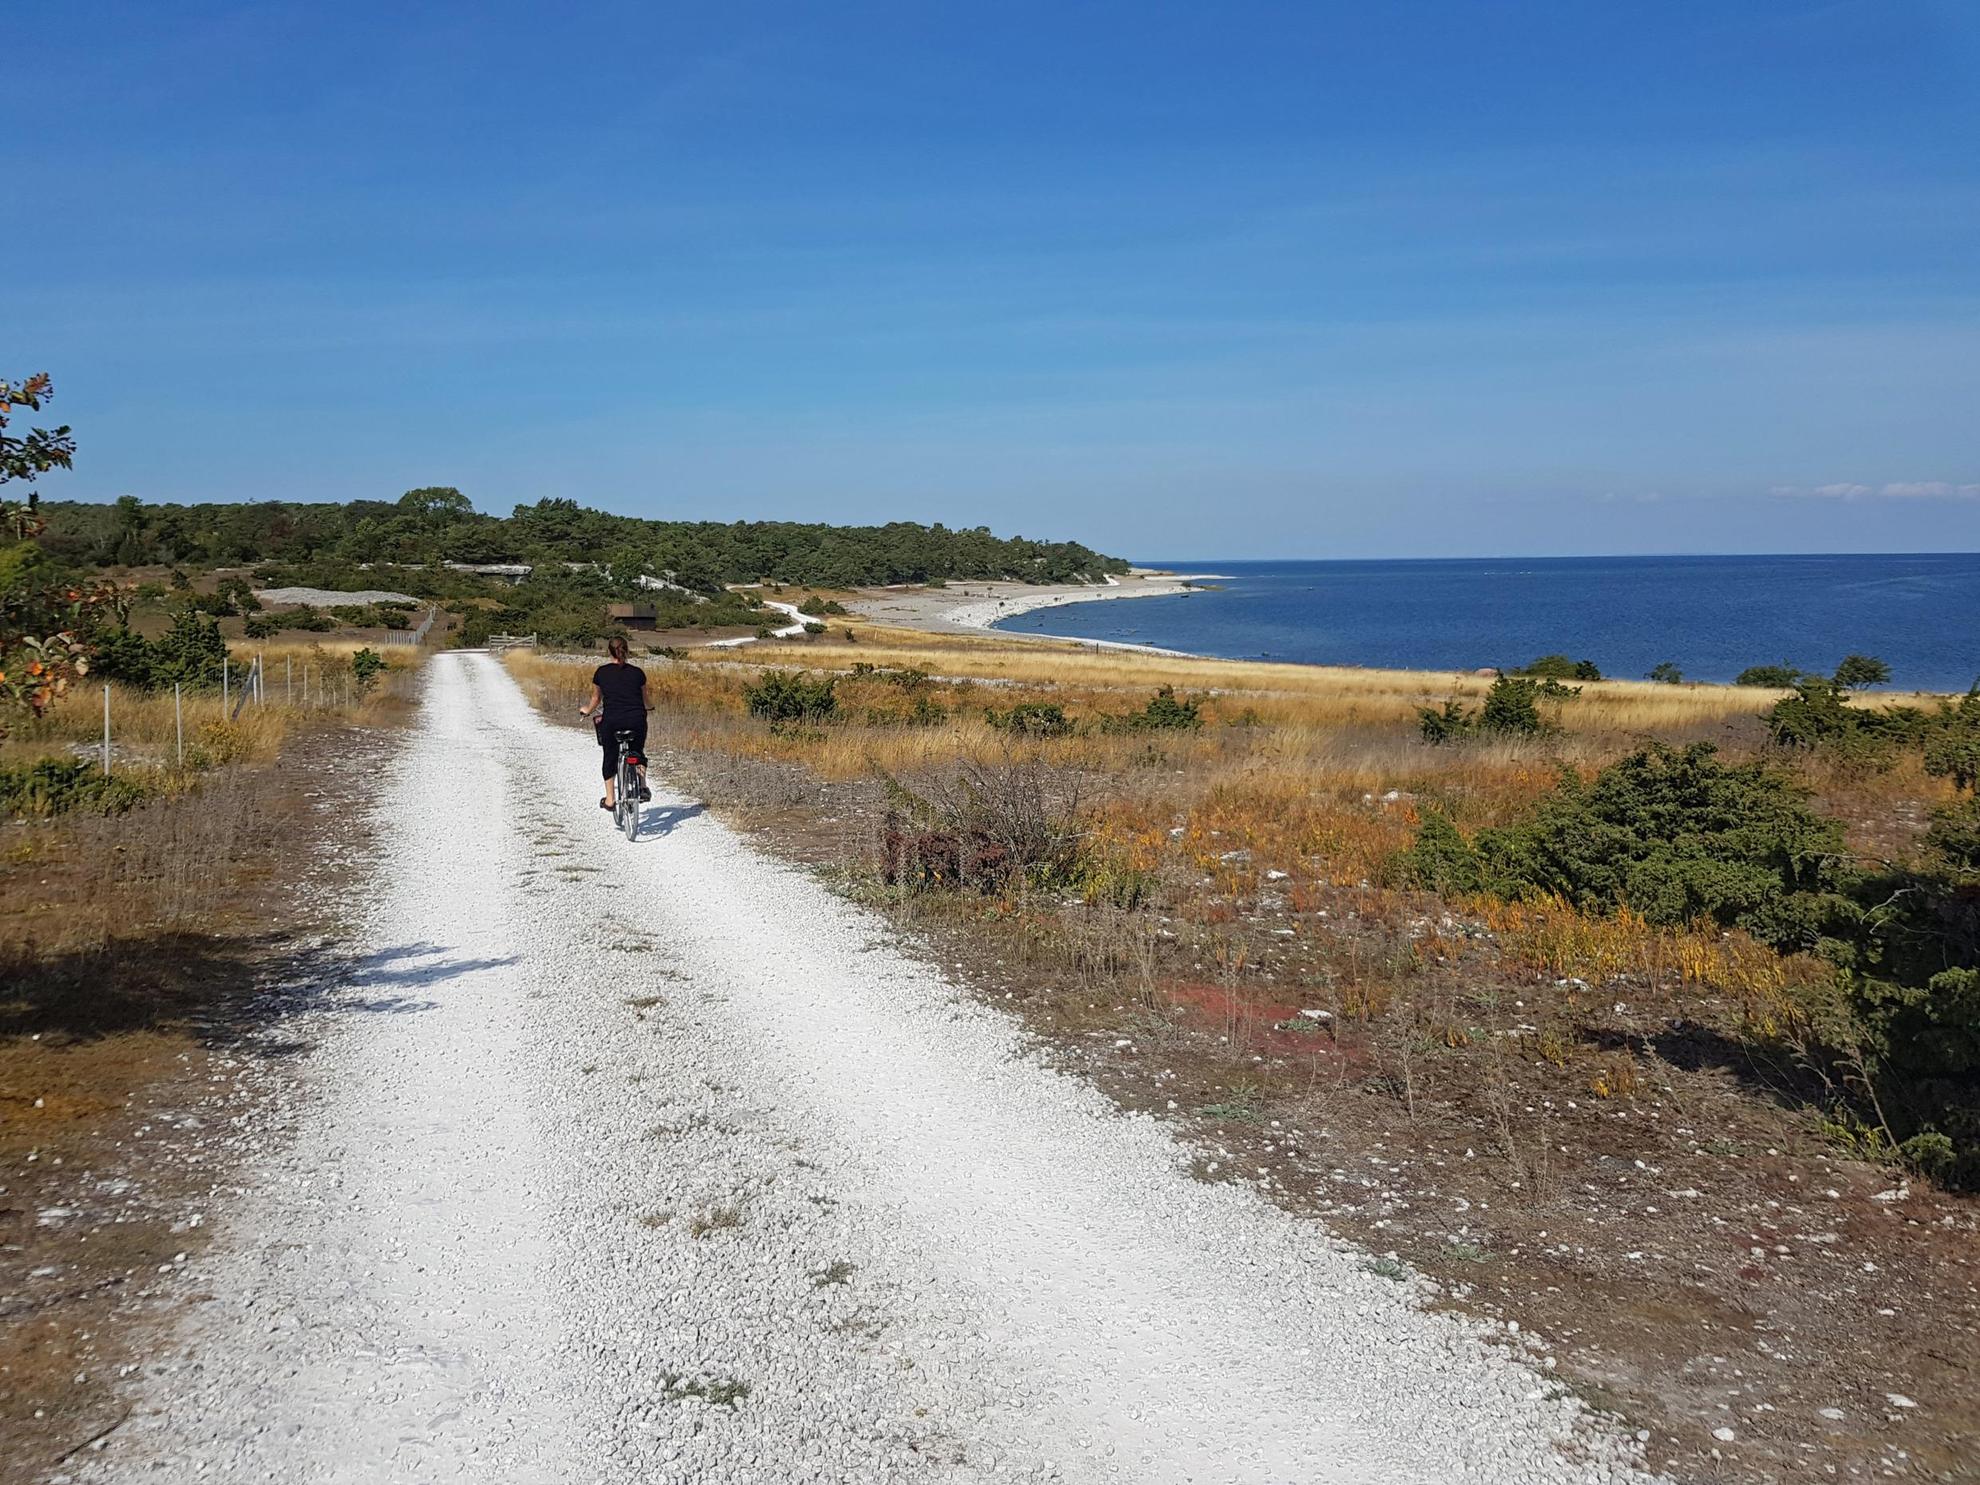 A person is biking on a country road along the sea on Gotland. Field with yellow grass and small bushes on the sides of the road.